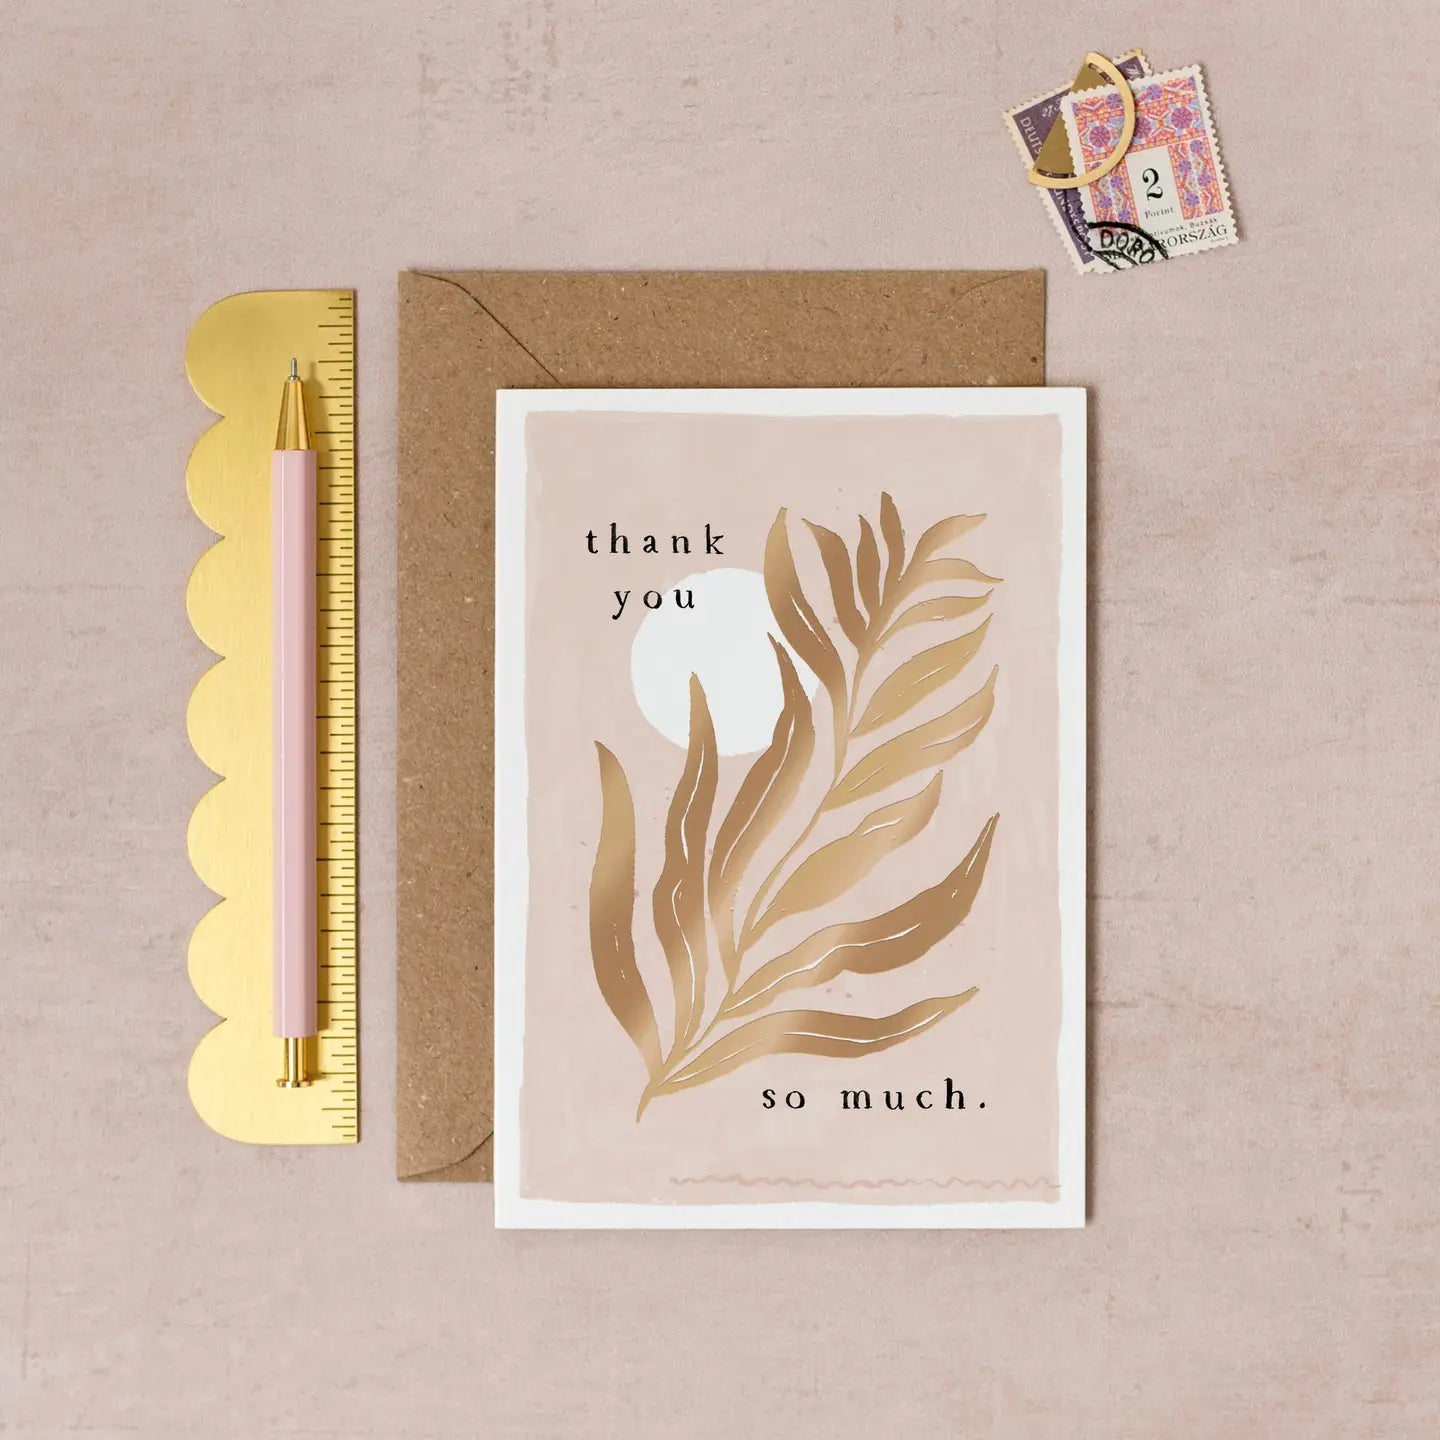 Gold Foil Leaf Thank You Card By Sister Paper Co.